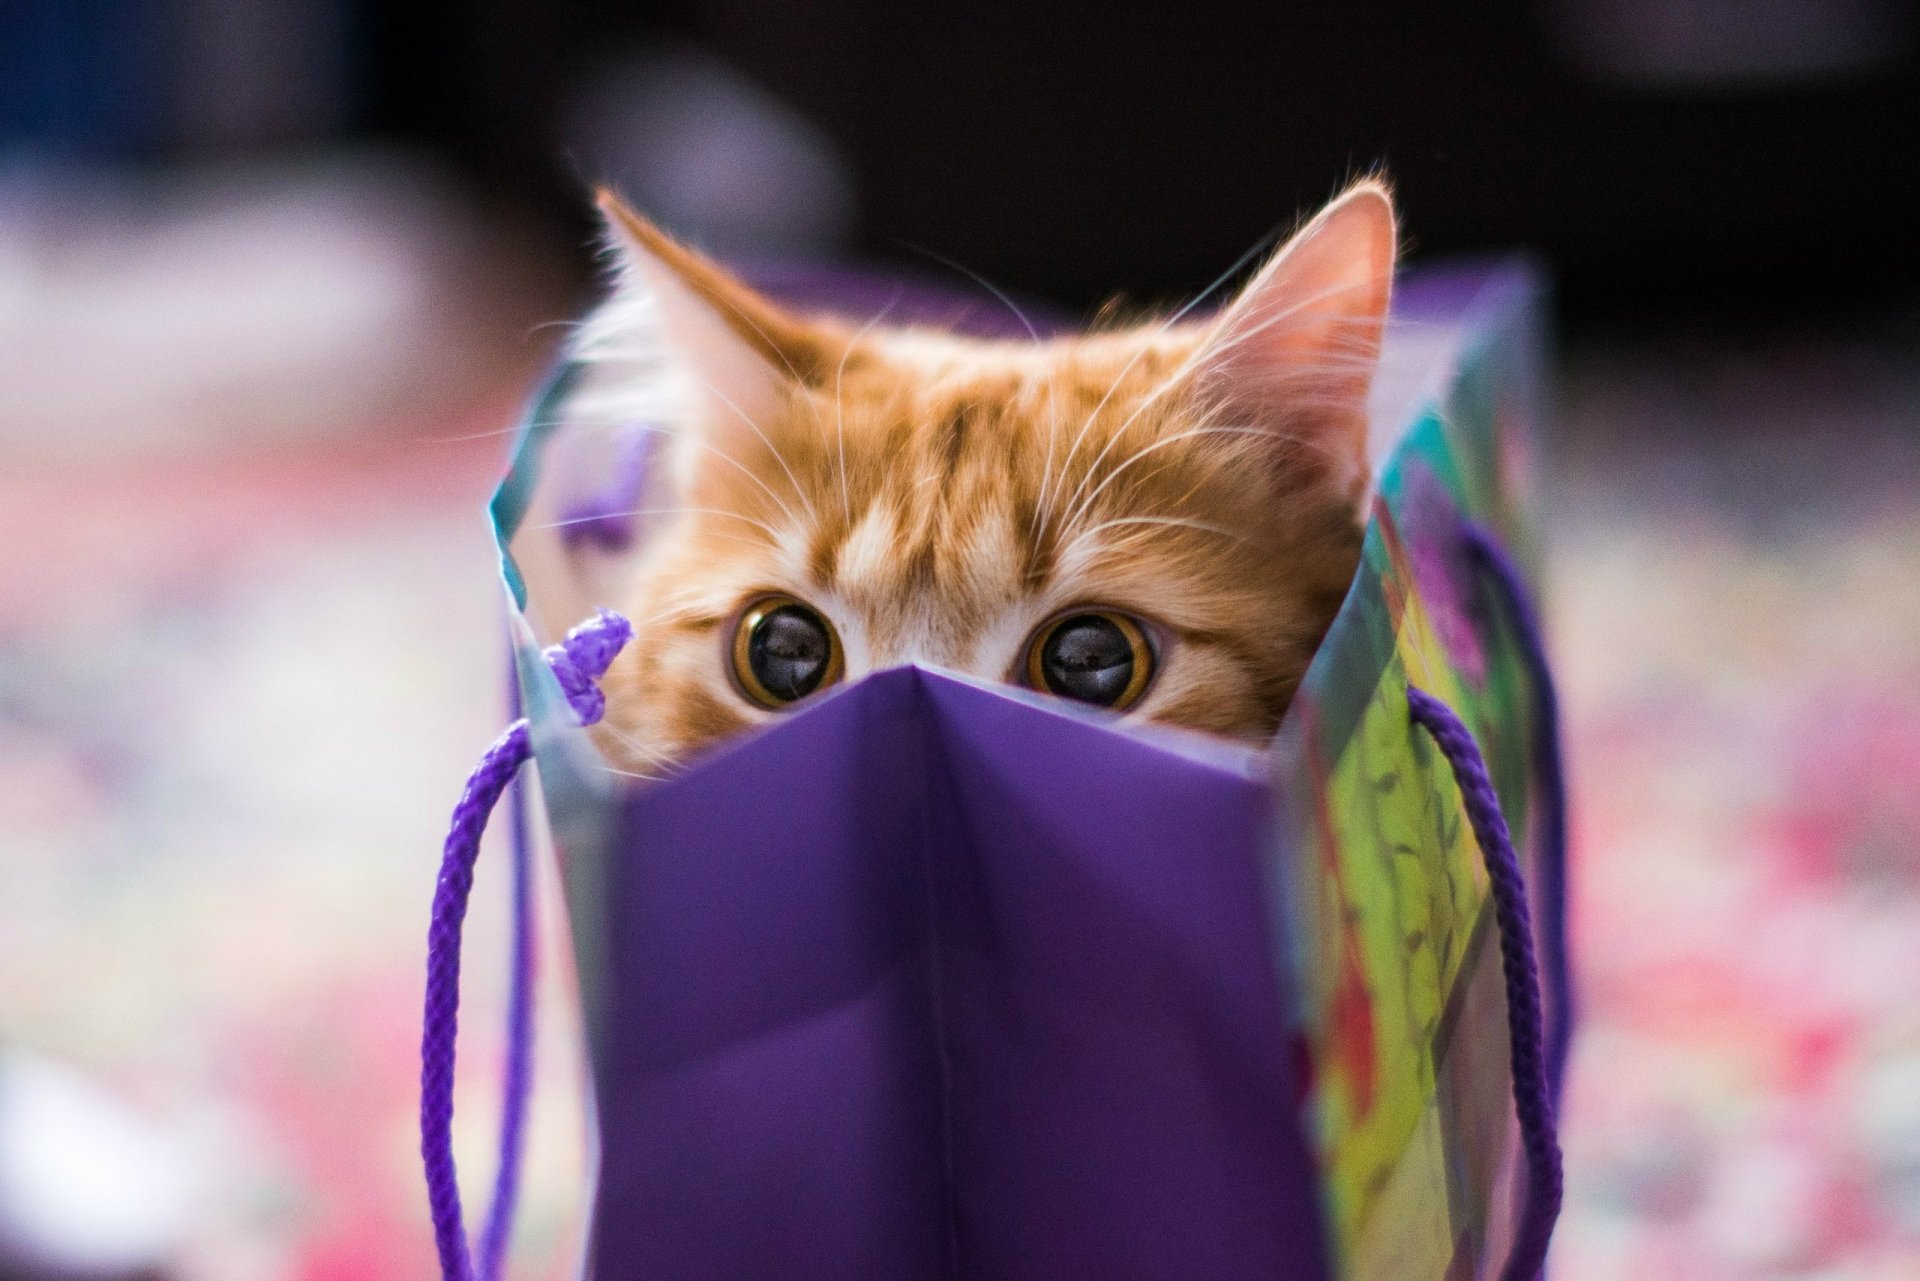 HD desktop wallpaper featuring an orange tabby cat peeking playfully out of a purple gift bag, capturing a moment of curiosity and charm.